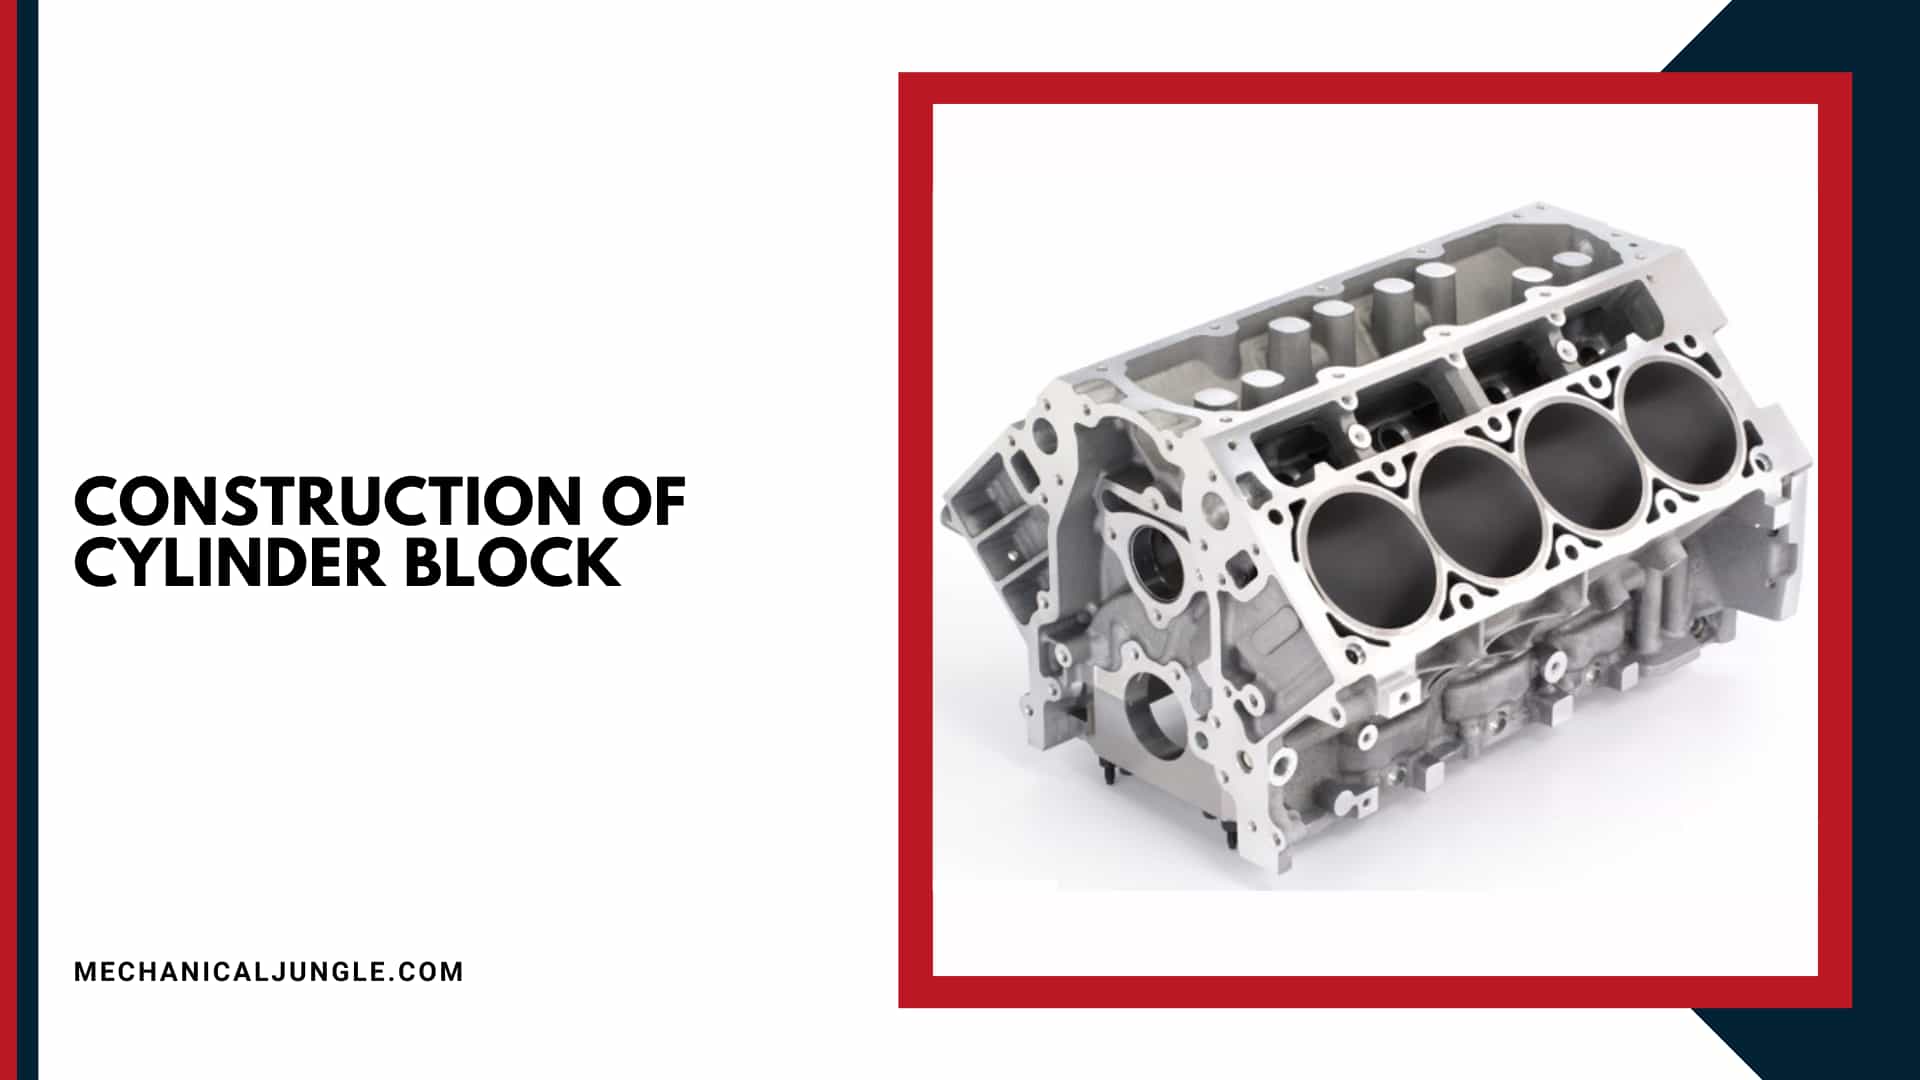 Construction of Cylinder Block